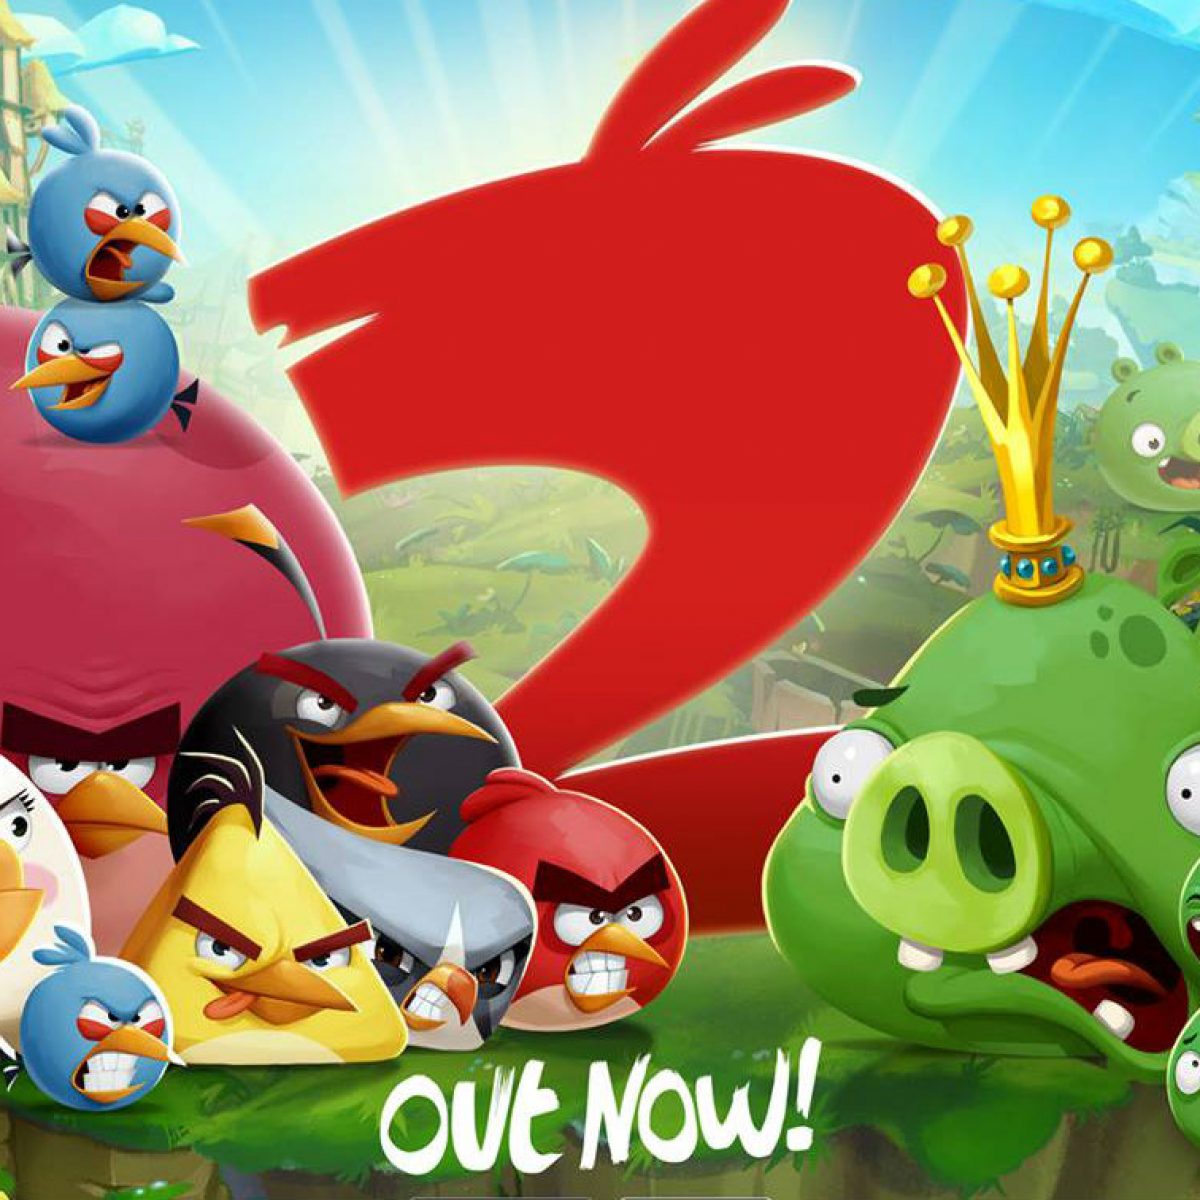 https://www.droid-life.com/wp-content/uploads/2015/07/Rovio-Angry-Birds-2-1200x1200-cropped.jpg